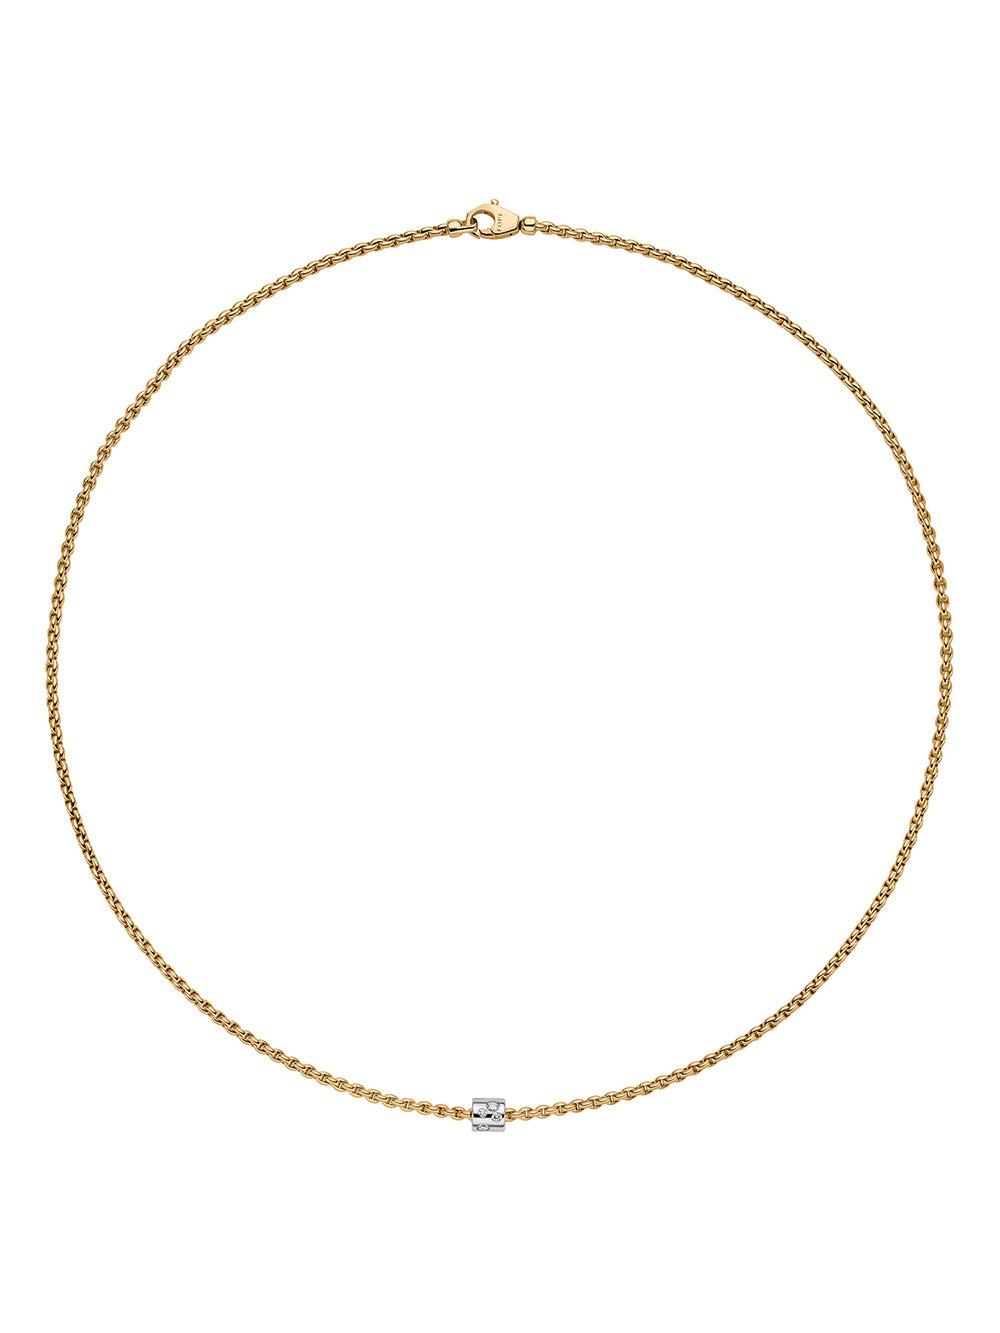 Fope Aria Necklace in 18ct Yellow & White Gold with Diamonds